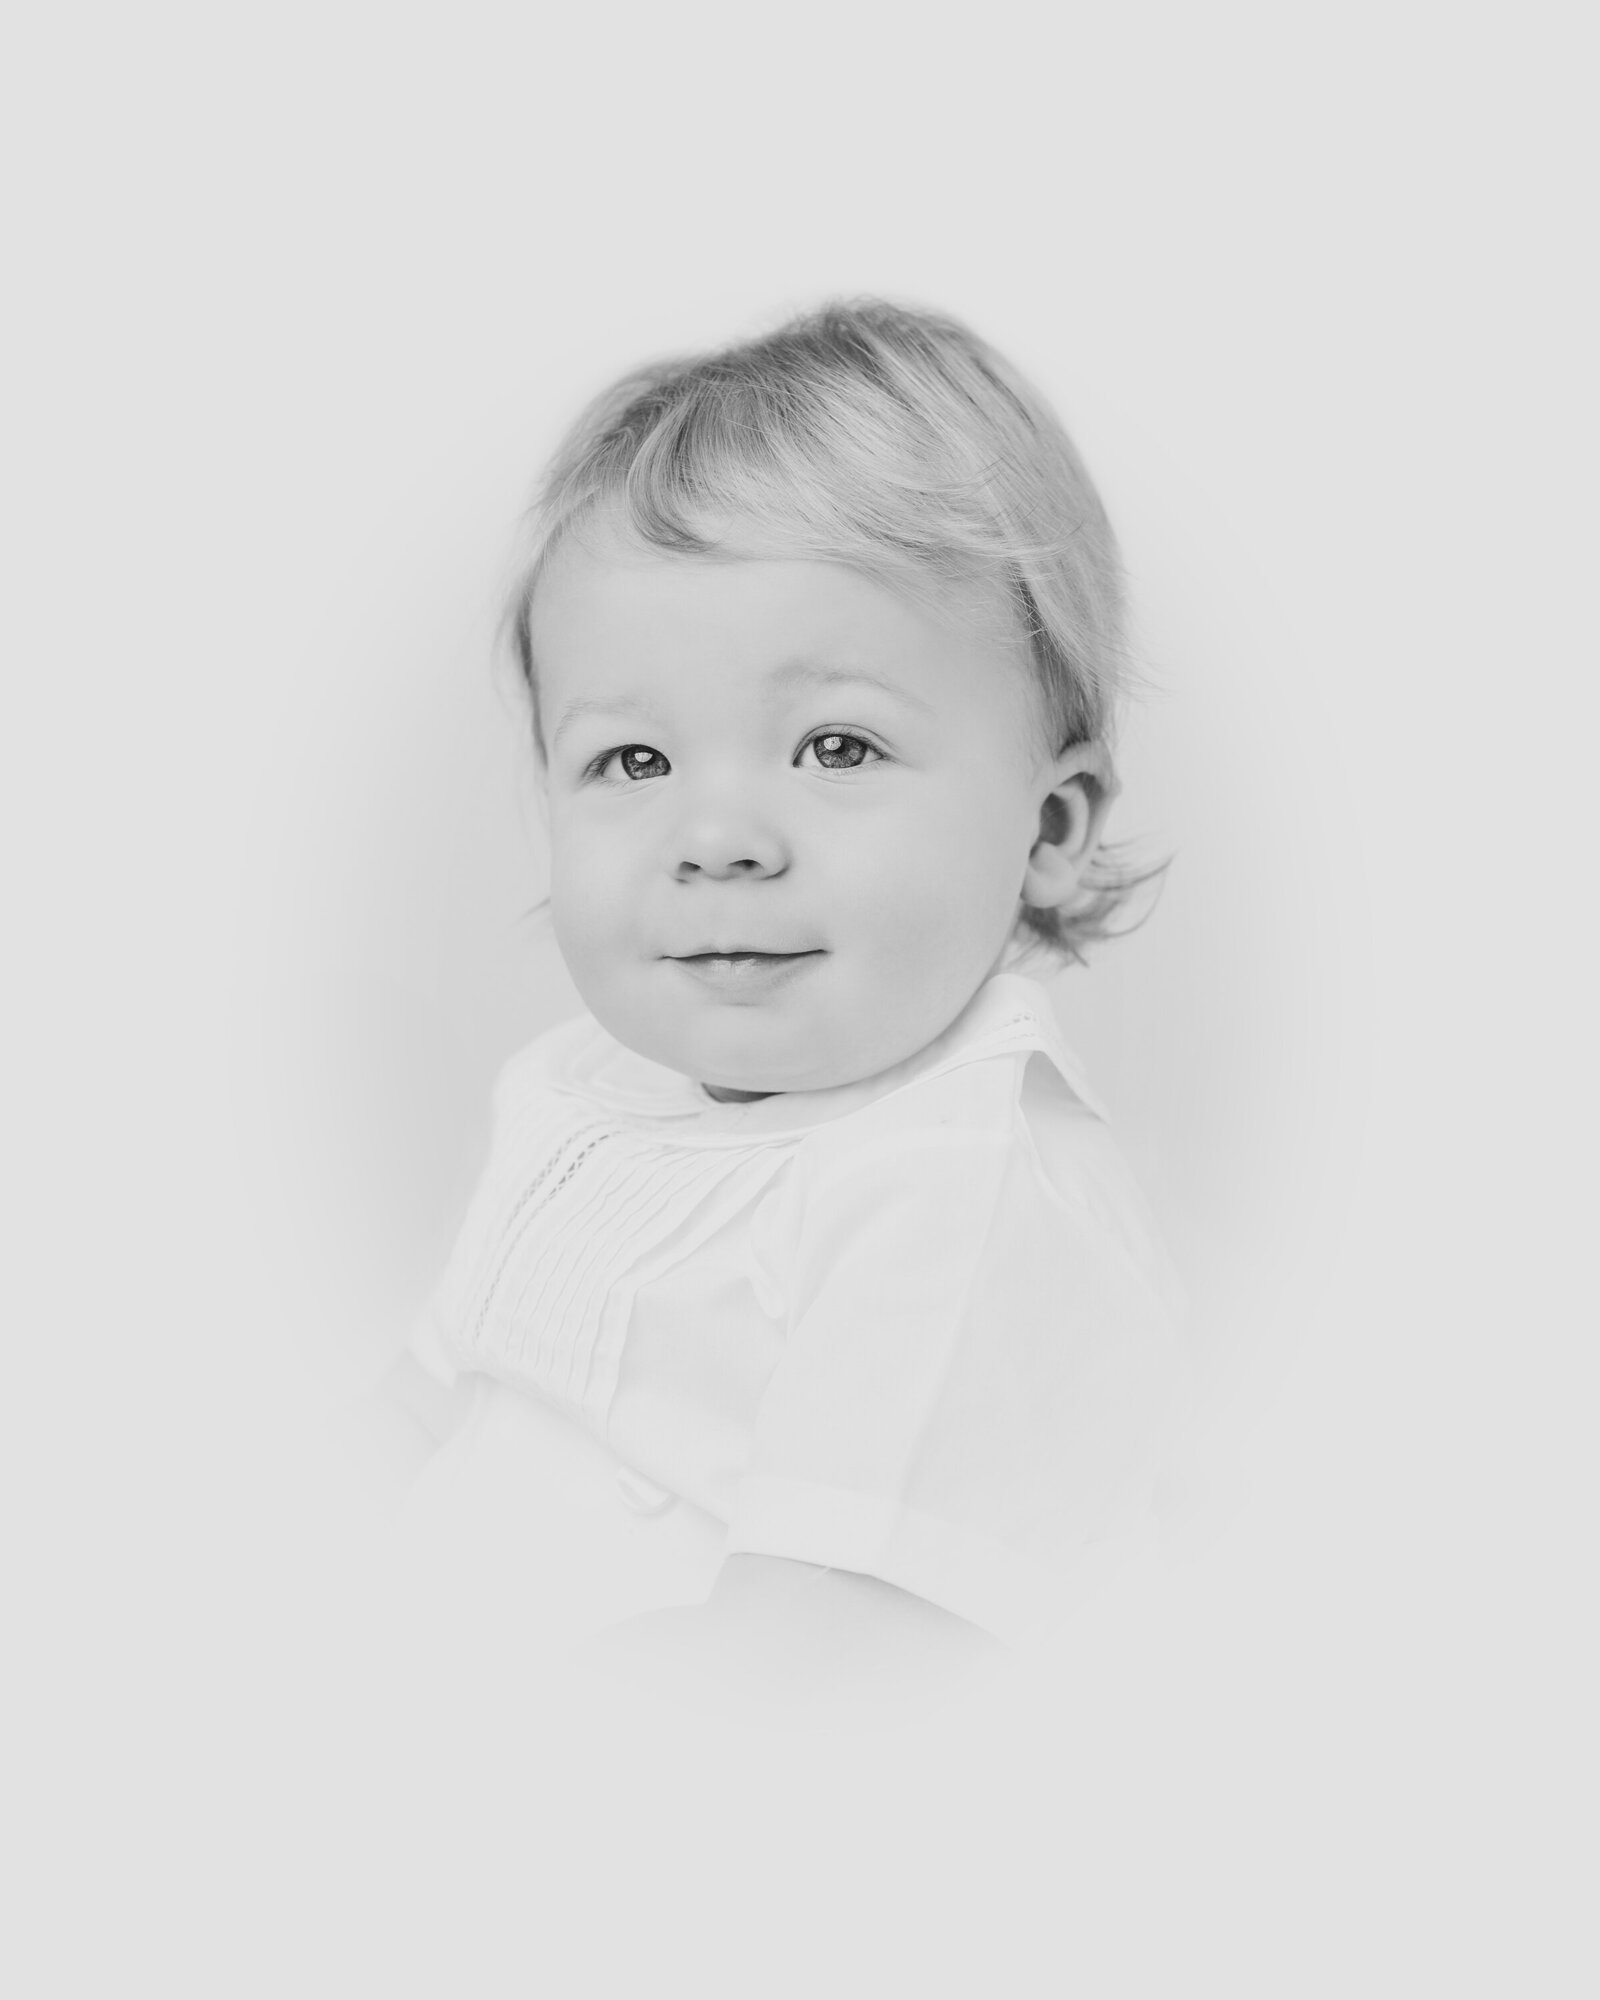 Black and white portrait of toddler boy taken at the Worth Capturing Photography studio in Raleigh NC